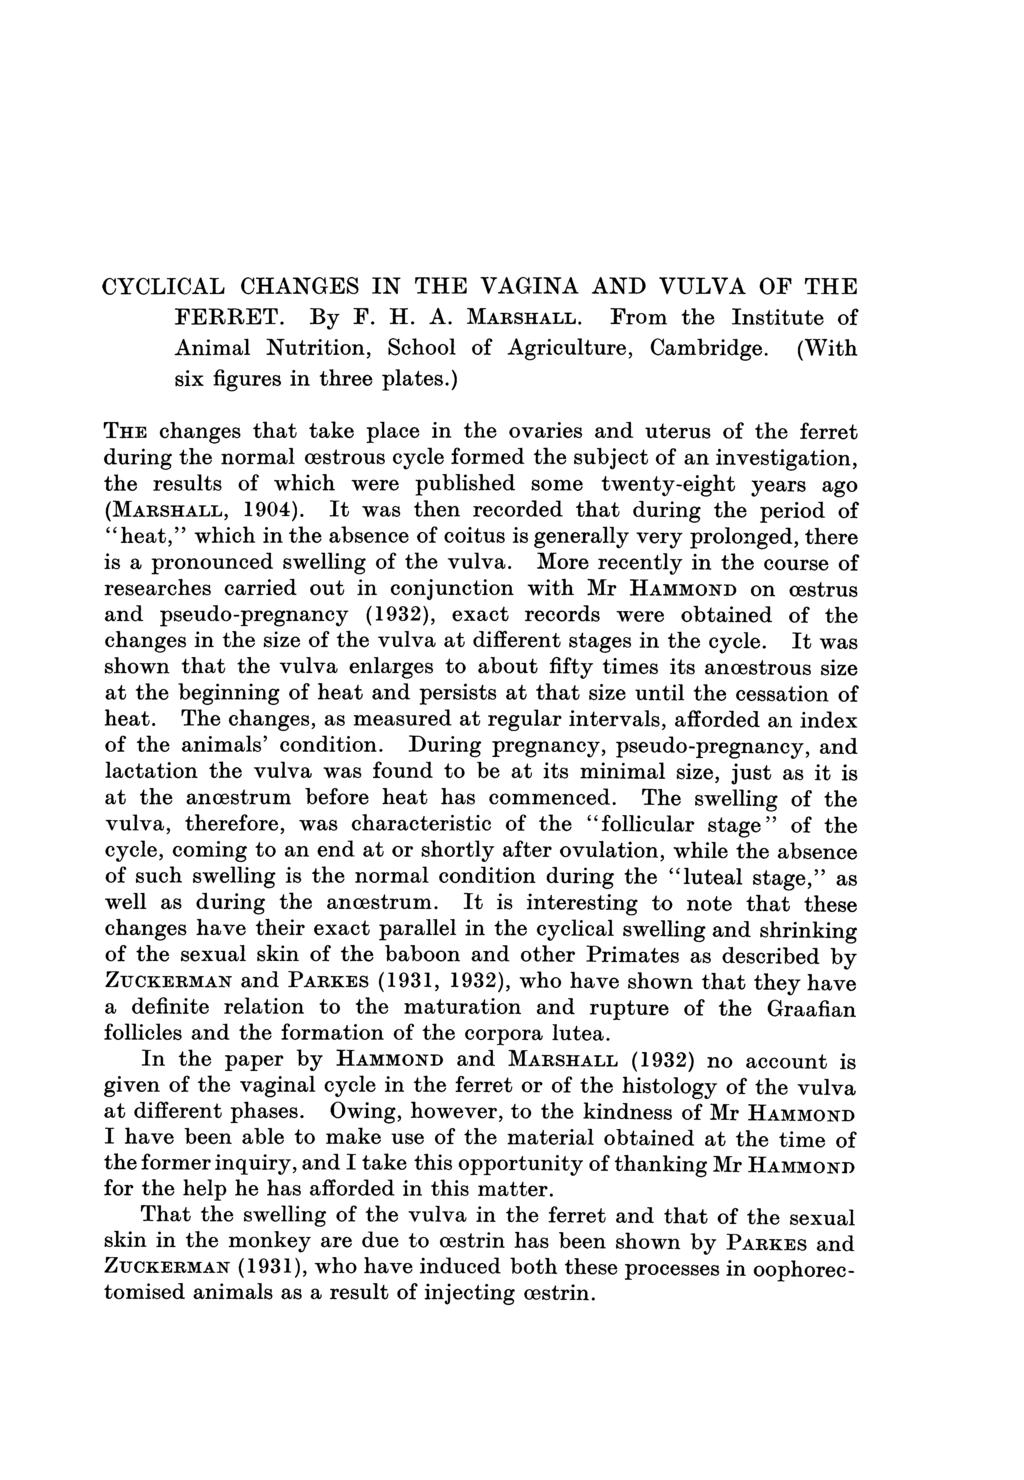 CYCLICAL CHANGES IN THE VAGINA AND VULVA OF THE FERRET. By F. H. A. MARSHALL. From the Institute of Animal Nutrition, School of Agriculture, Cambridge. (With six figures in three plates.